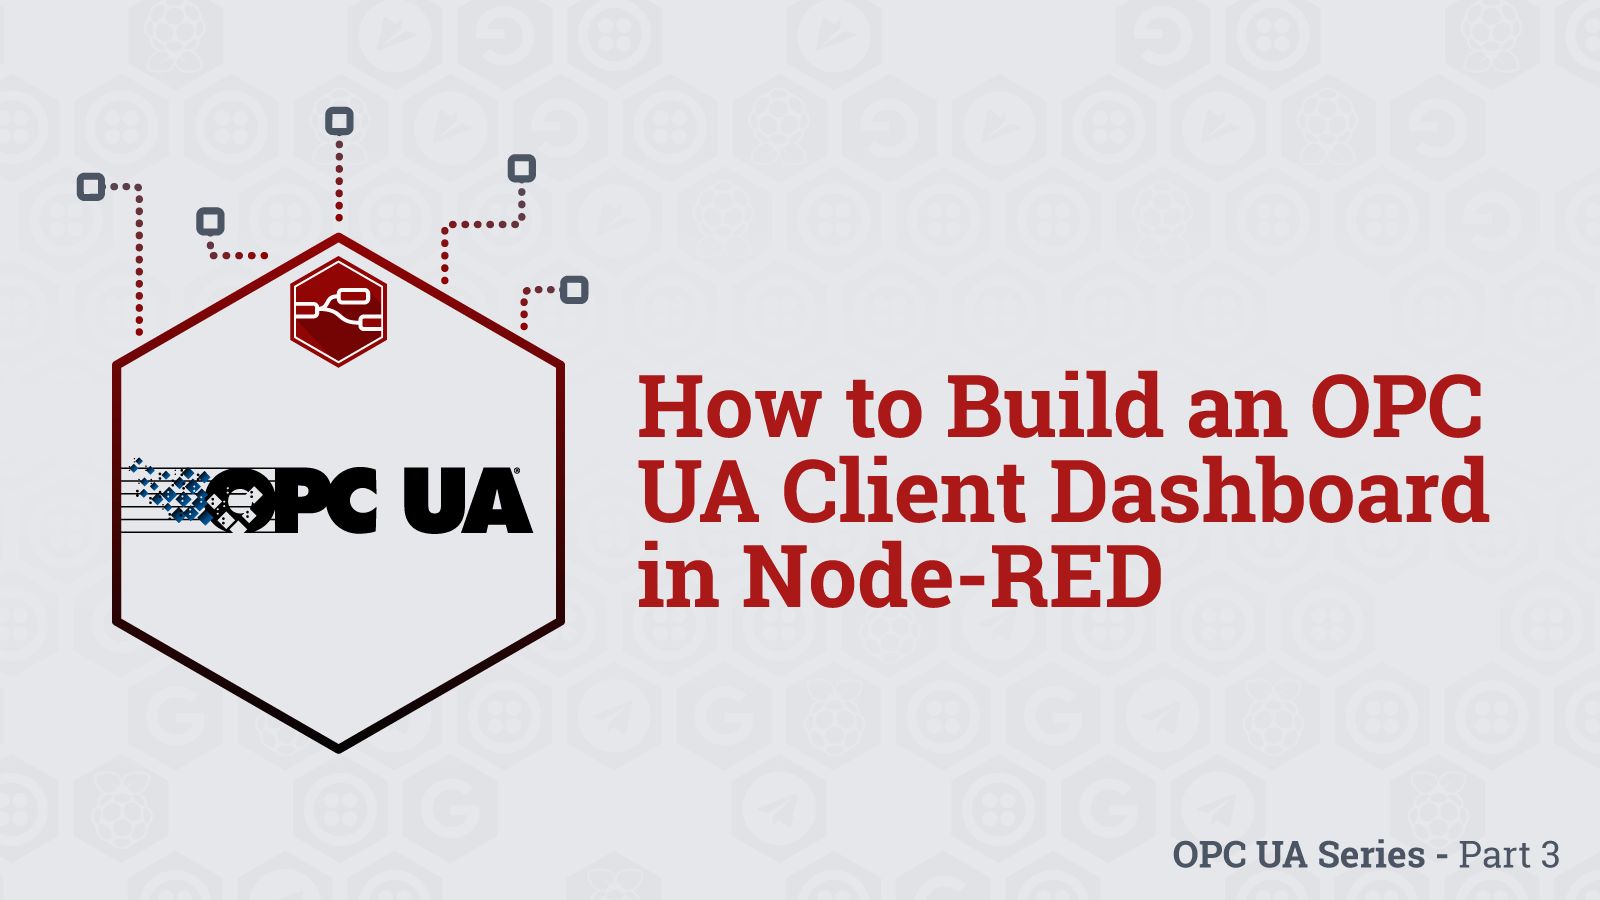 Image representing How to Build an OPC UA Client Dashboard in Node-RED - Part 3